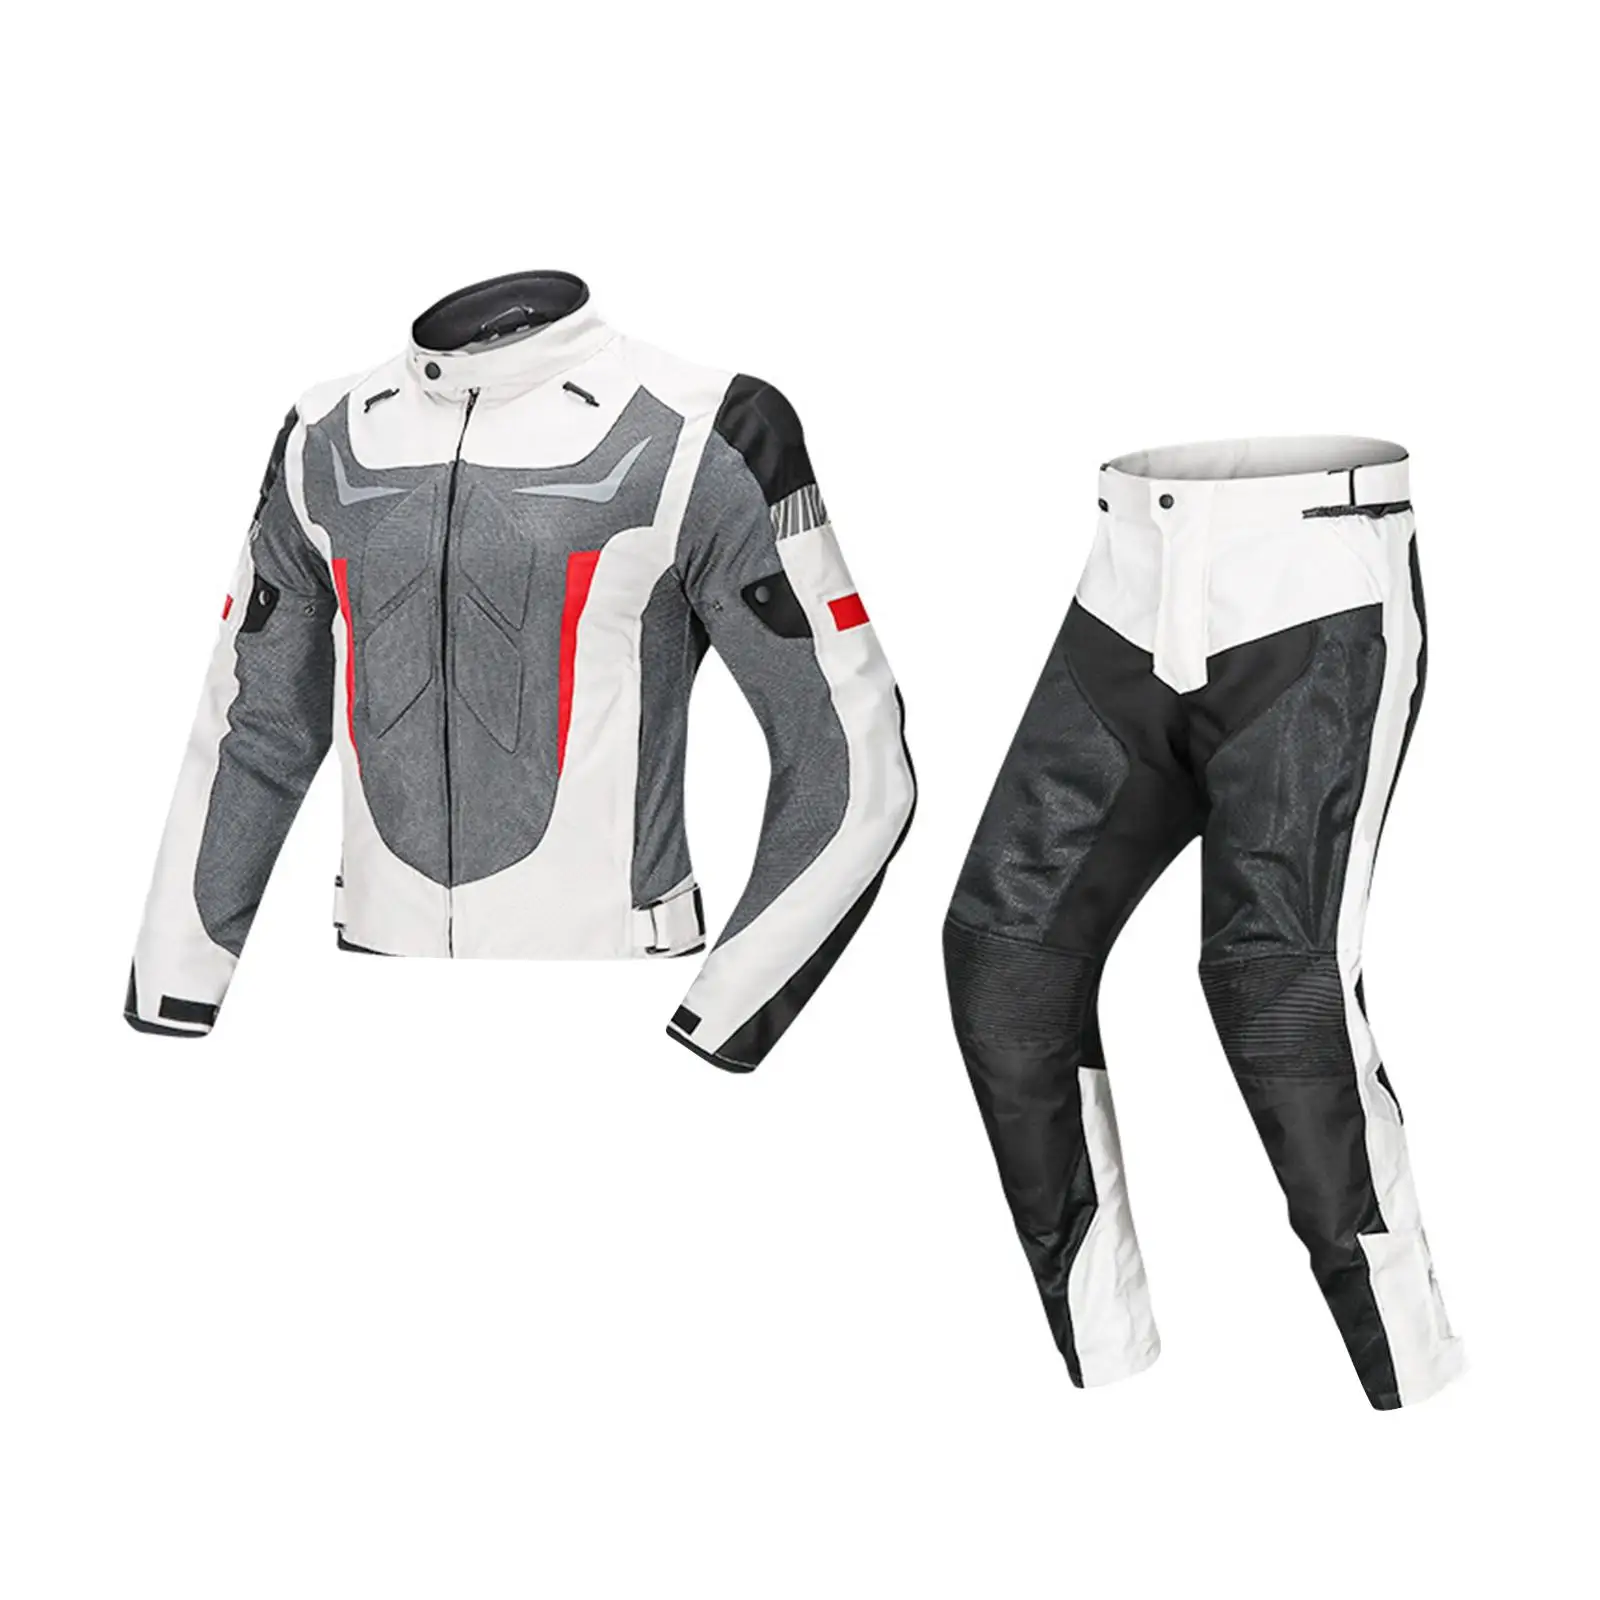 Riding Jacket Windproof Durable Motorcycle Jacket Wearable Riding Protection